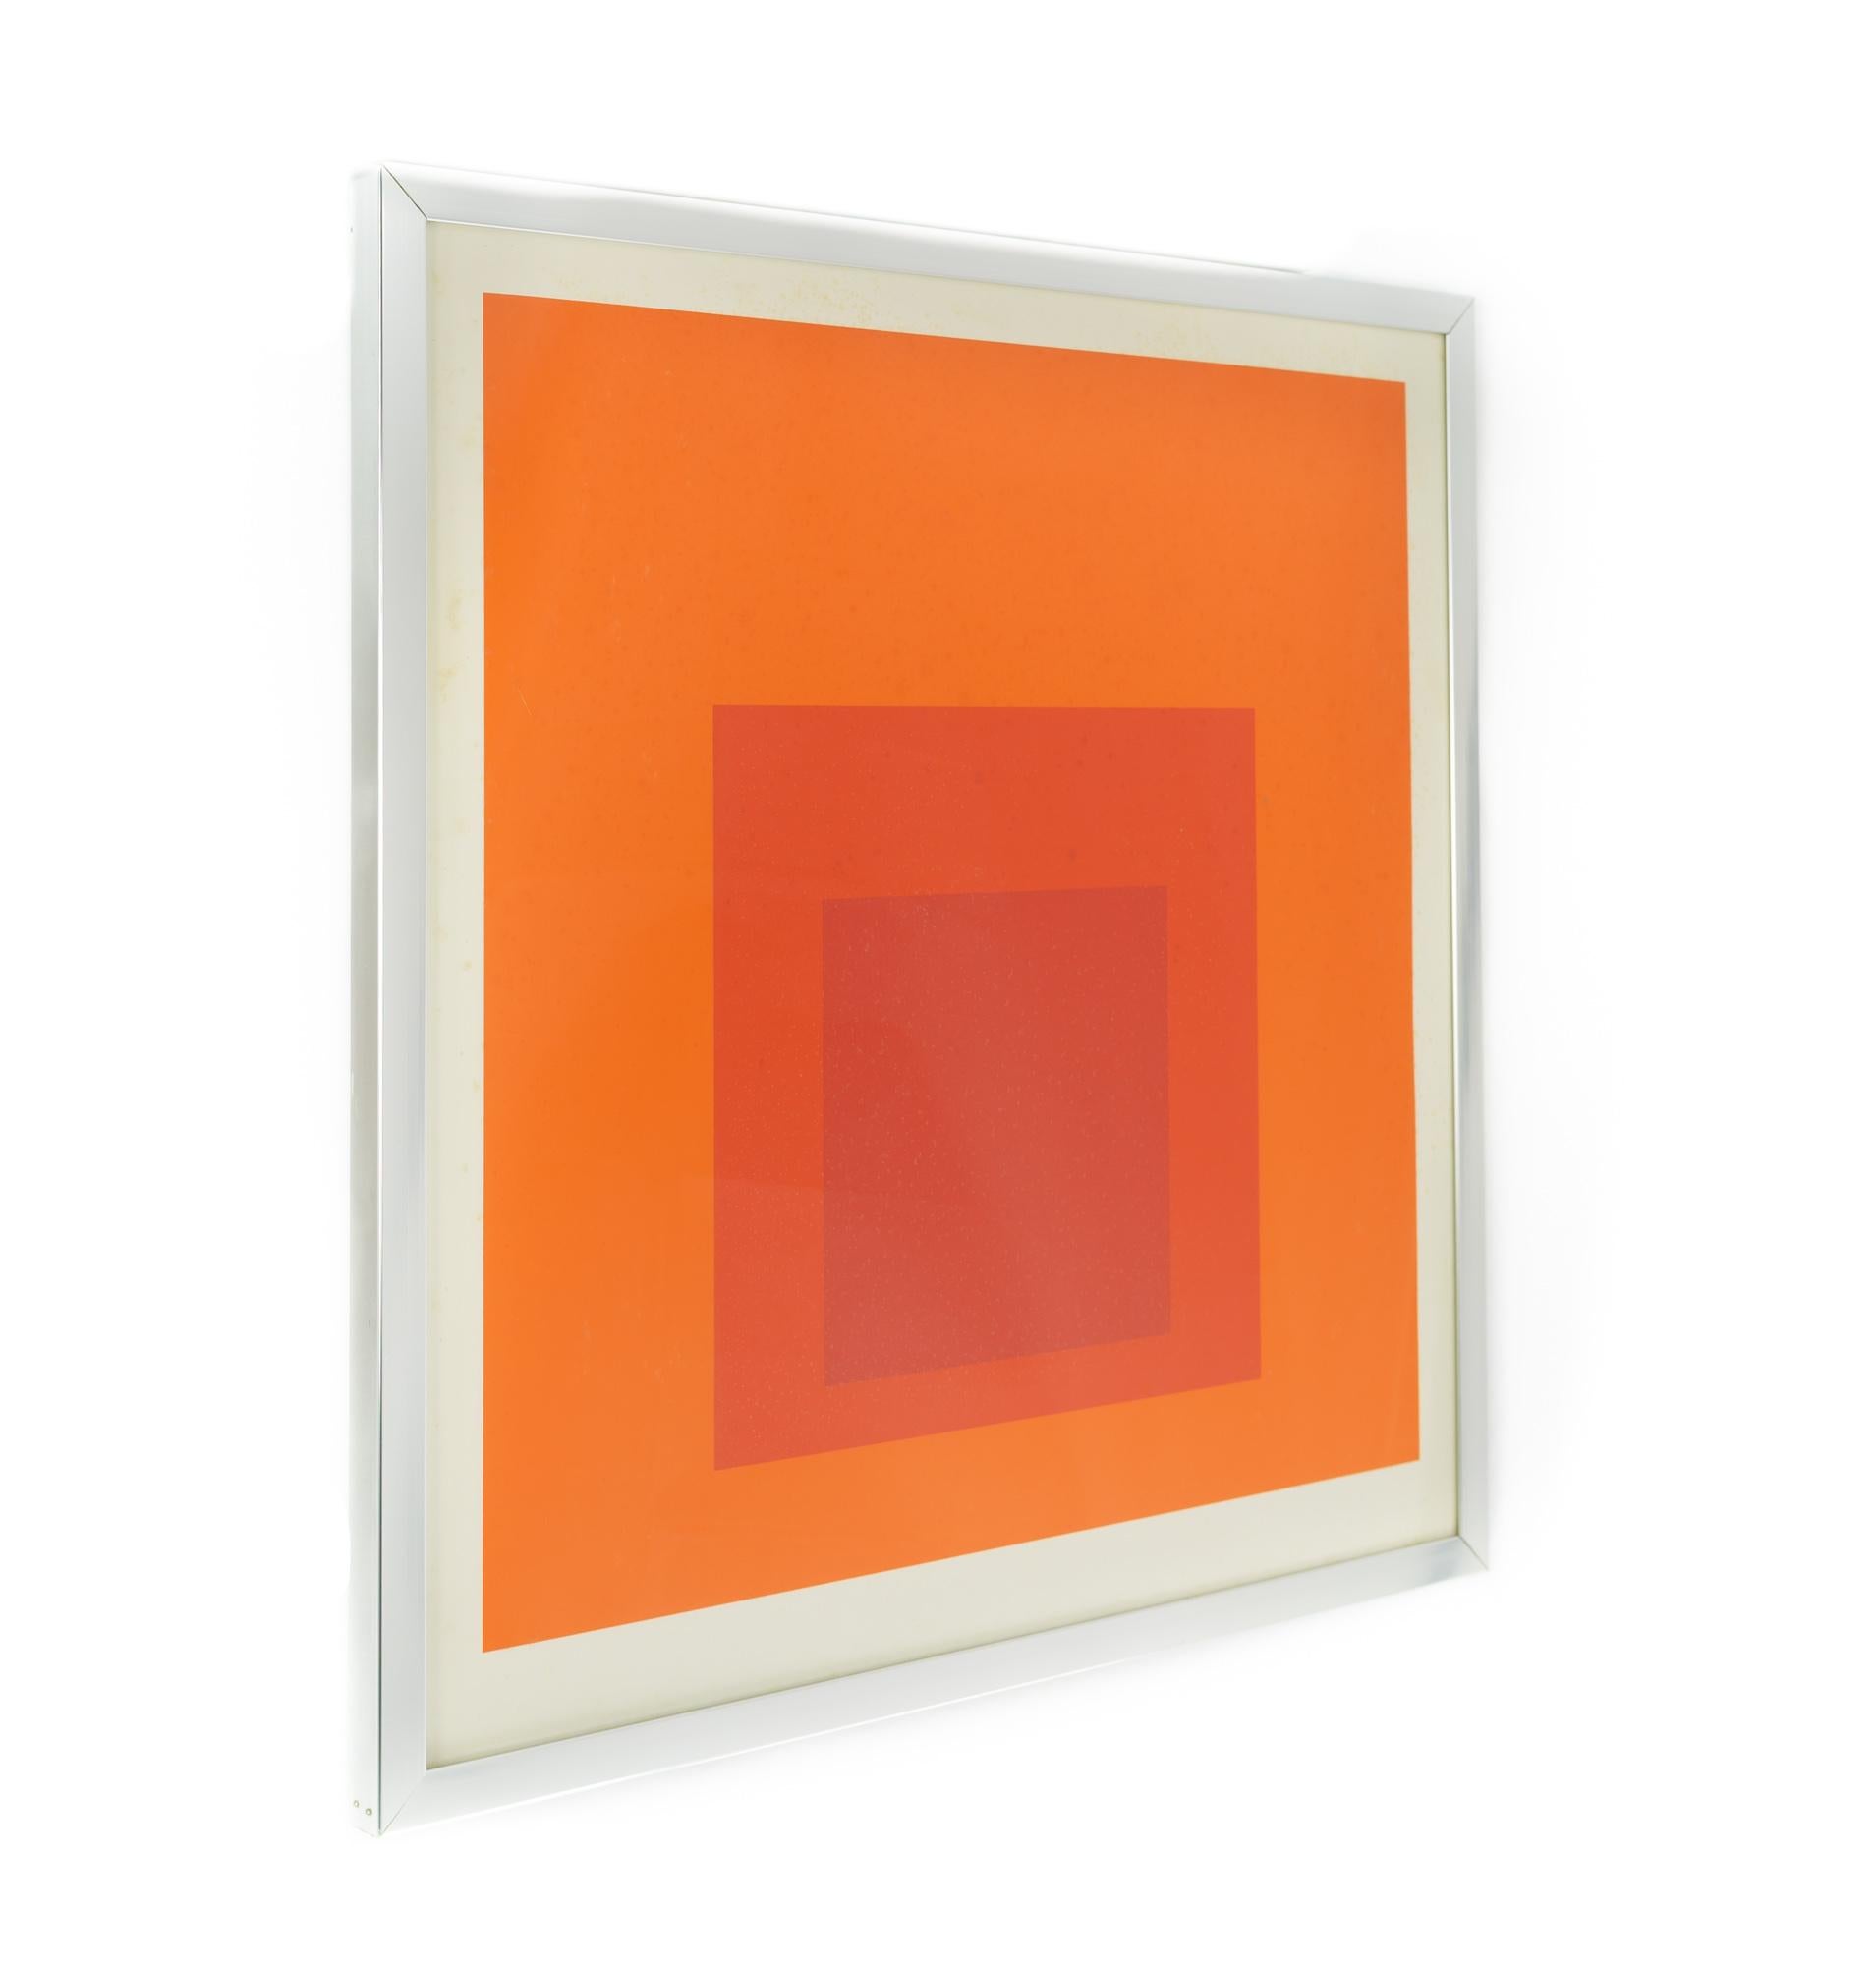 Framed Josef Albers 'Homage to the Square' mid century red/orange print

This piece measures: 27.75 wide x 1.25 deep x 28.25 inches high

Great vintage condition

We take our photos in a controlled lighting studio to show as much detail as